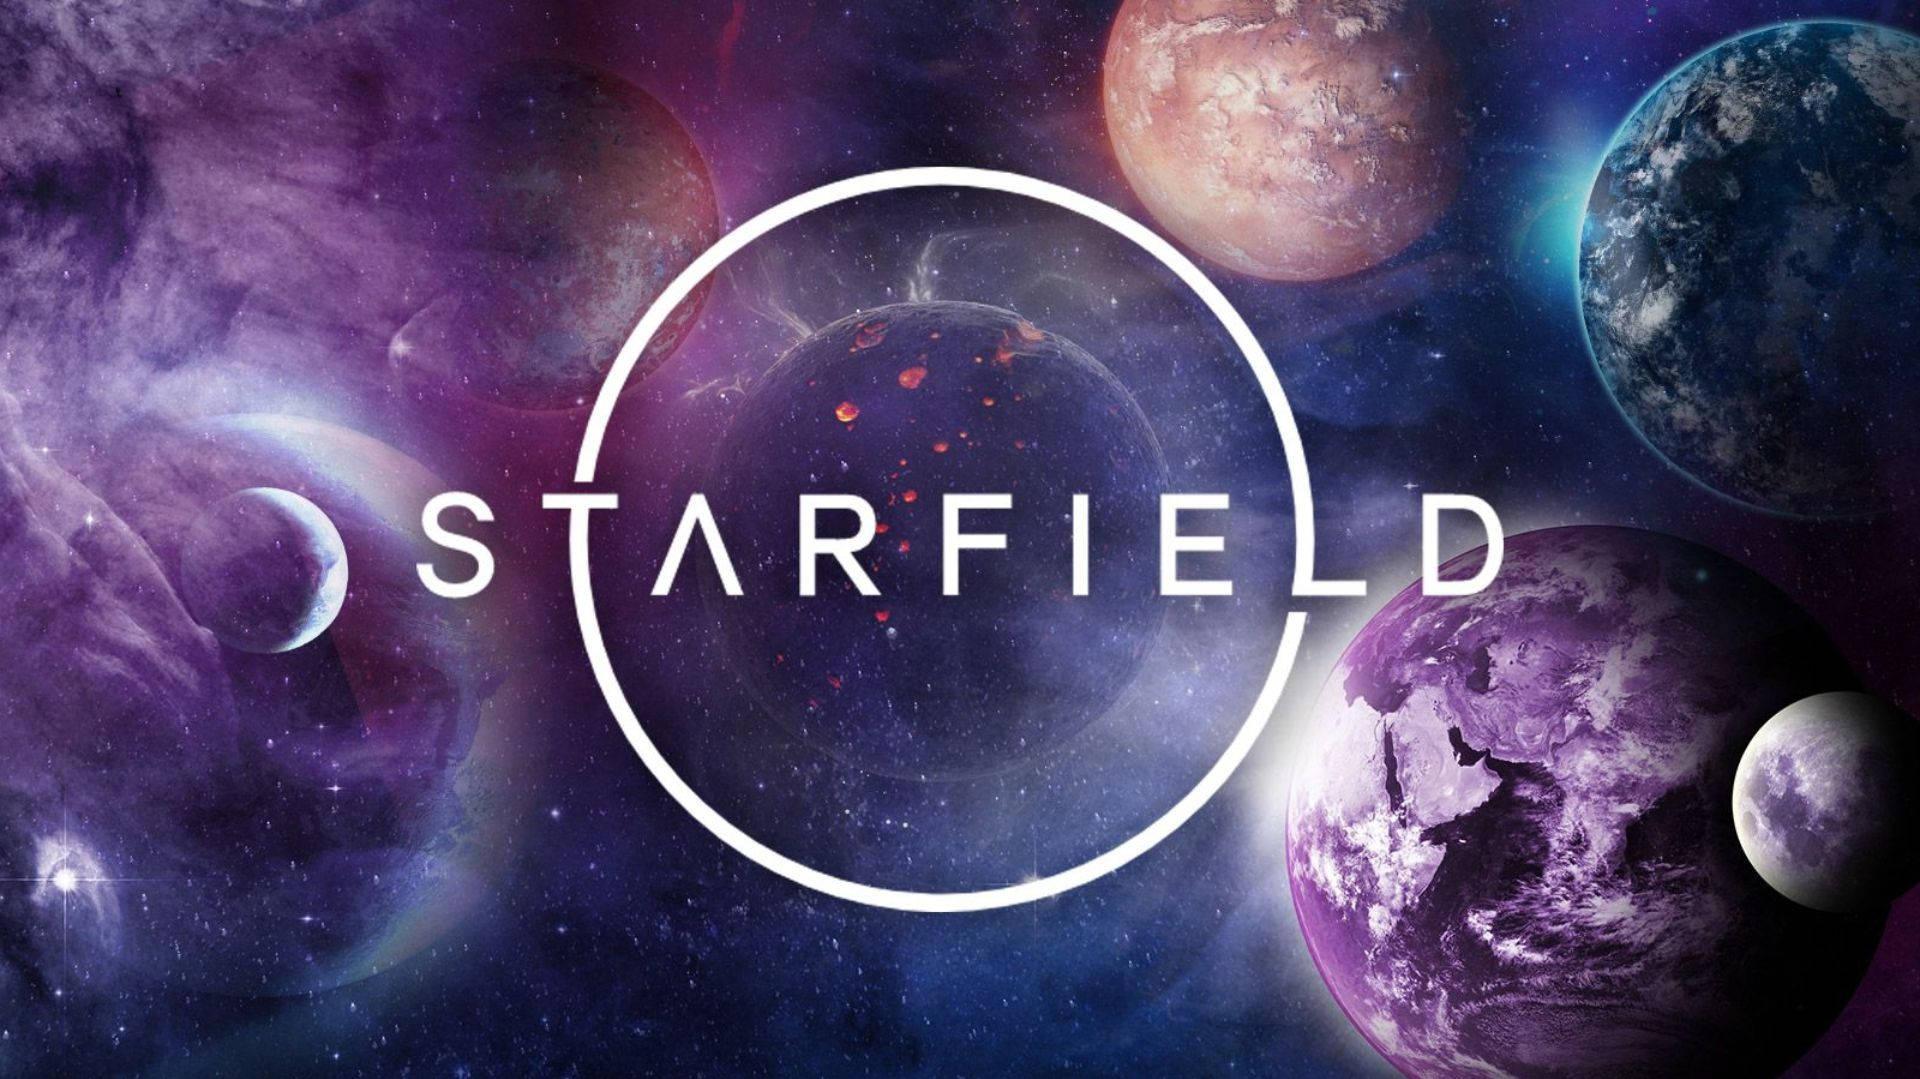 More 4k & 8k Starfield Wallpapers (Link in Comments) : r/Starfield